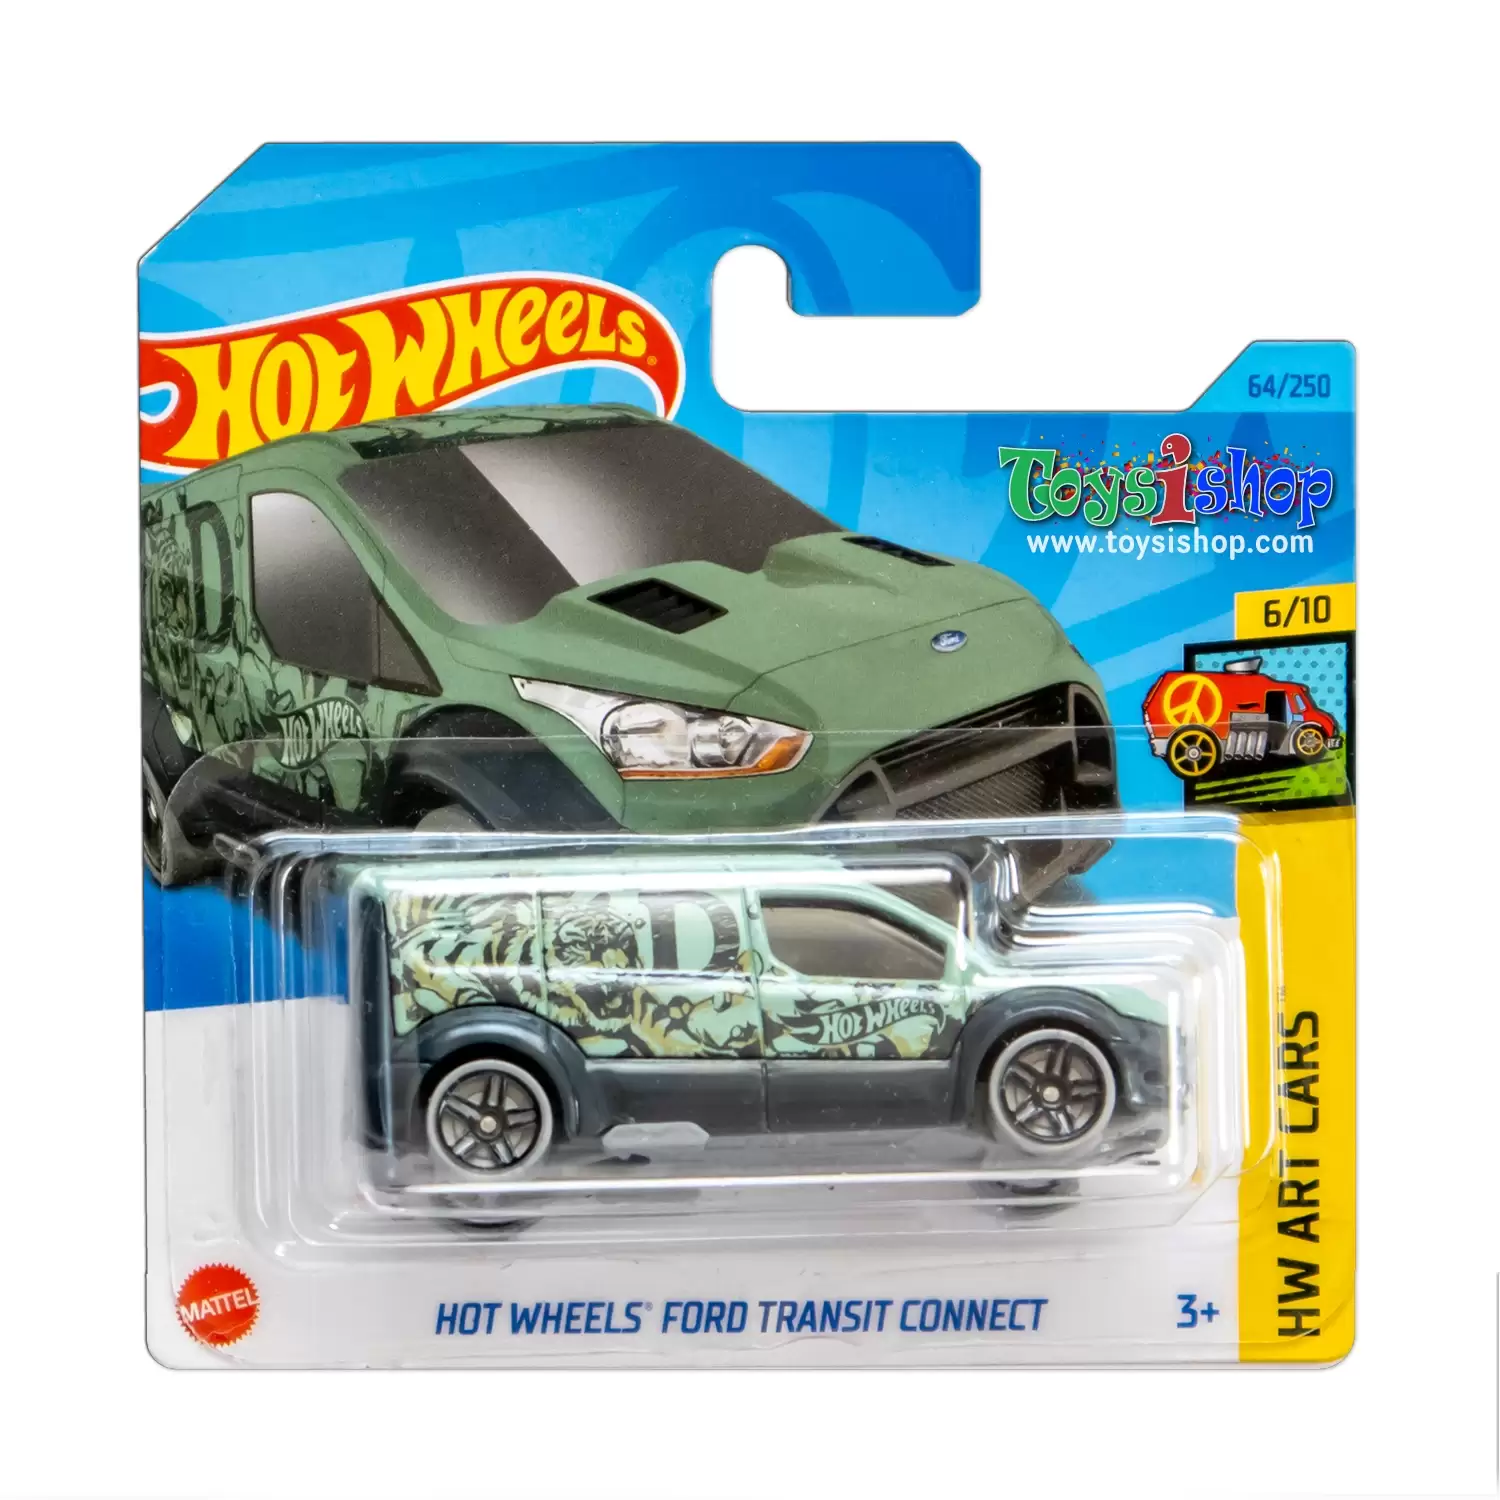 Hot Wheels Ford Transit Connect- HW Art Cars - 64